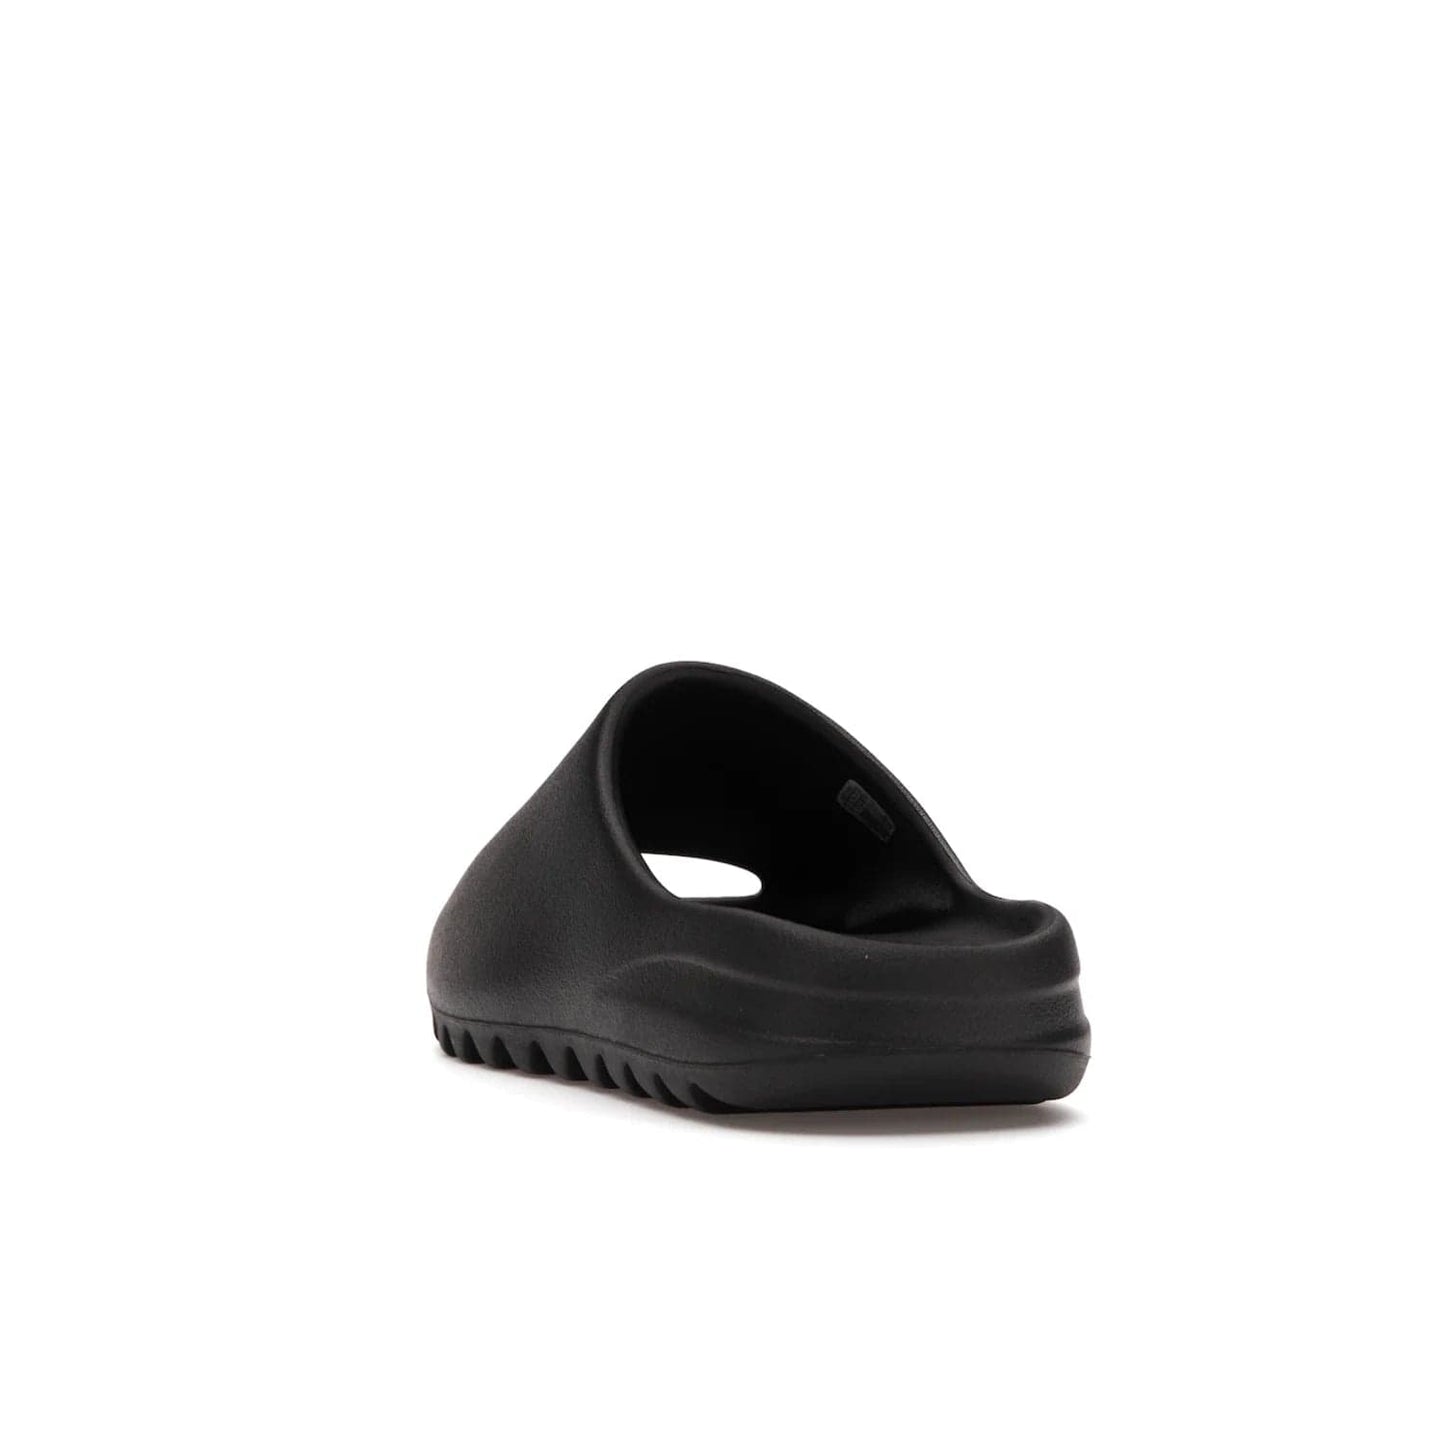 adidas Yeezy Slide Onyx - Image 26 - Only at www.BallersClubKickz.com - Step into comfort and style with the adidas Yeezy Slide Onyx. Featuring foam construction, an all-black colorway and a grooved outsole for stability and responsiveness, this versatile slide is a must-have for your collection.